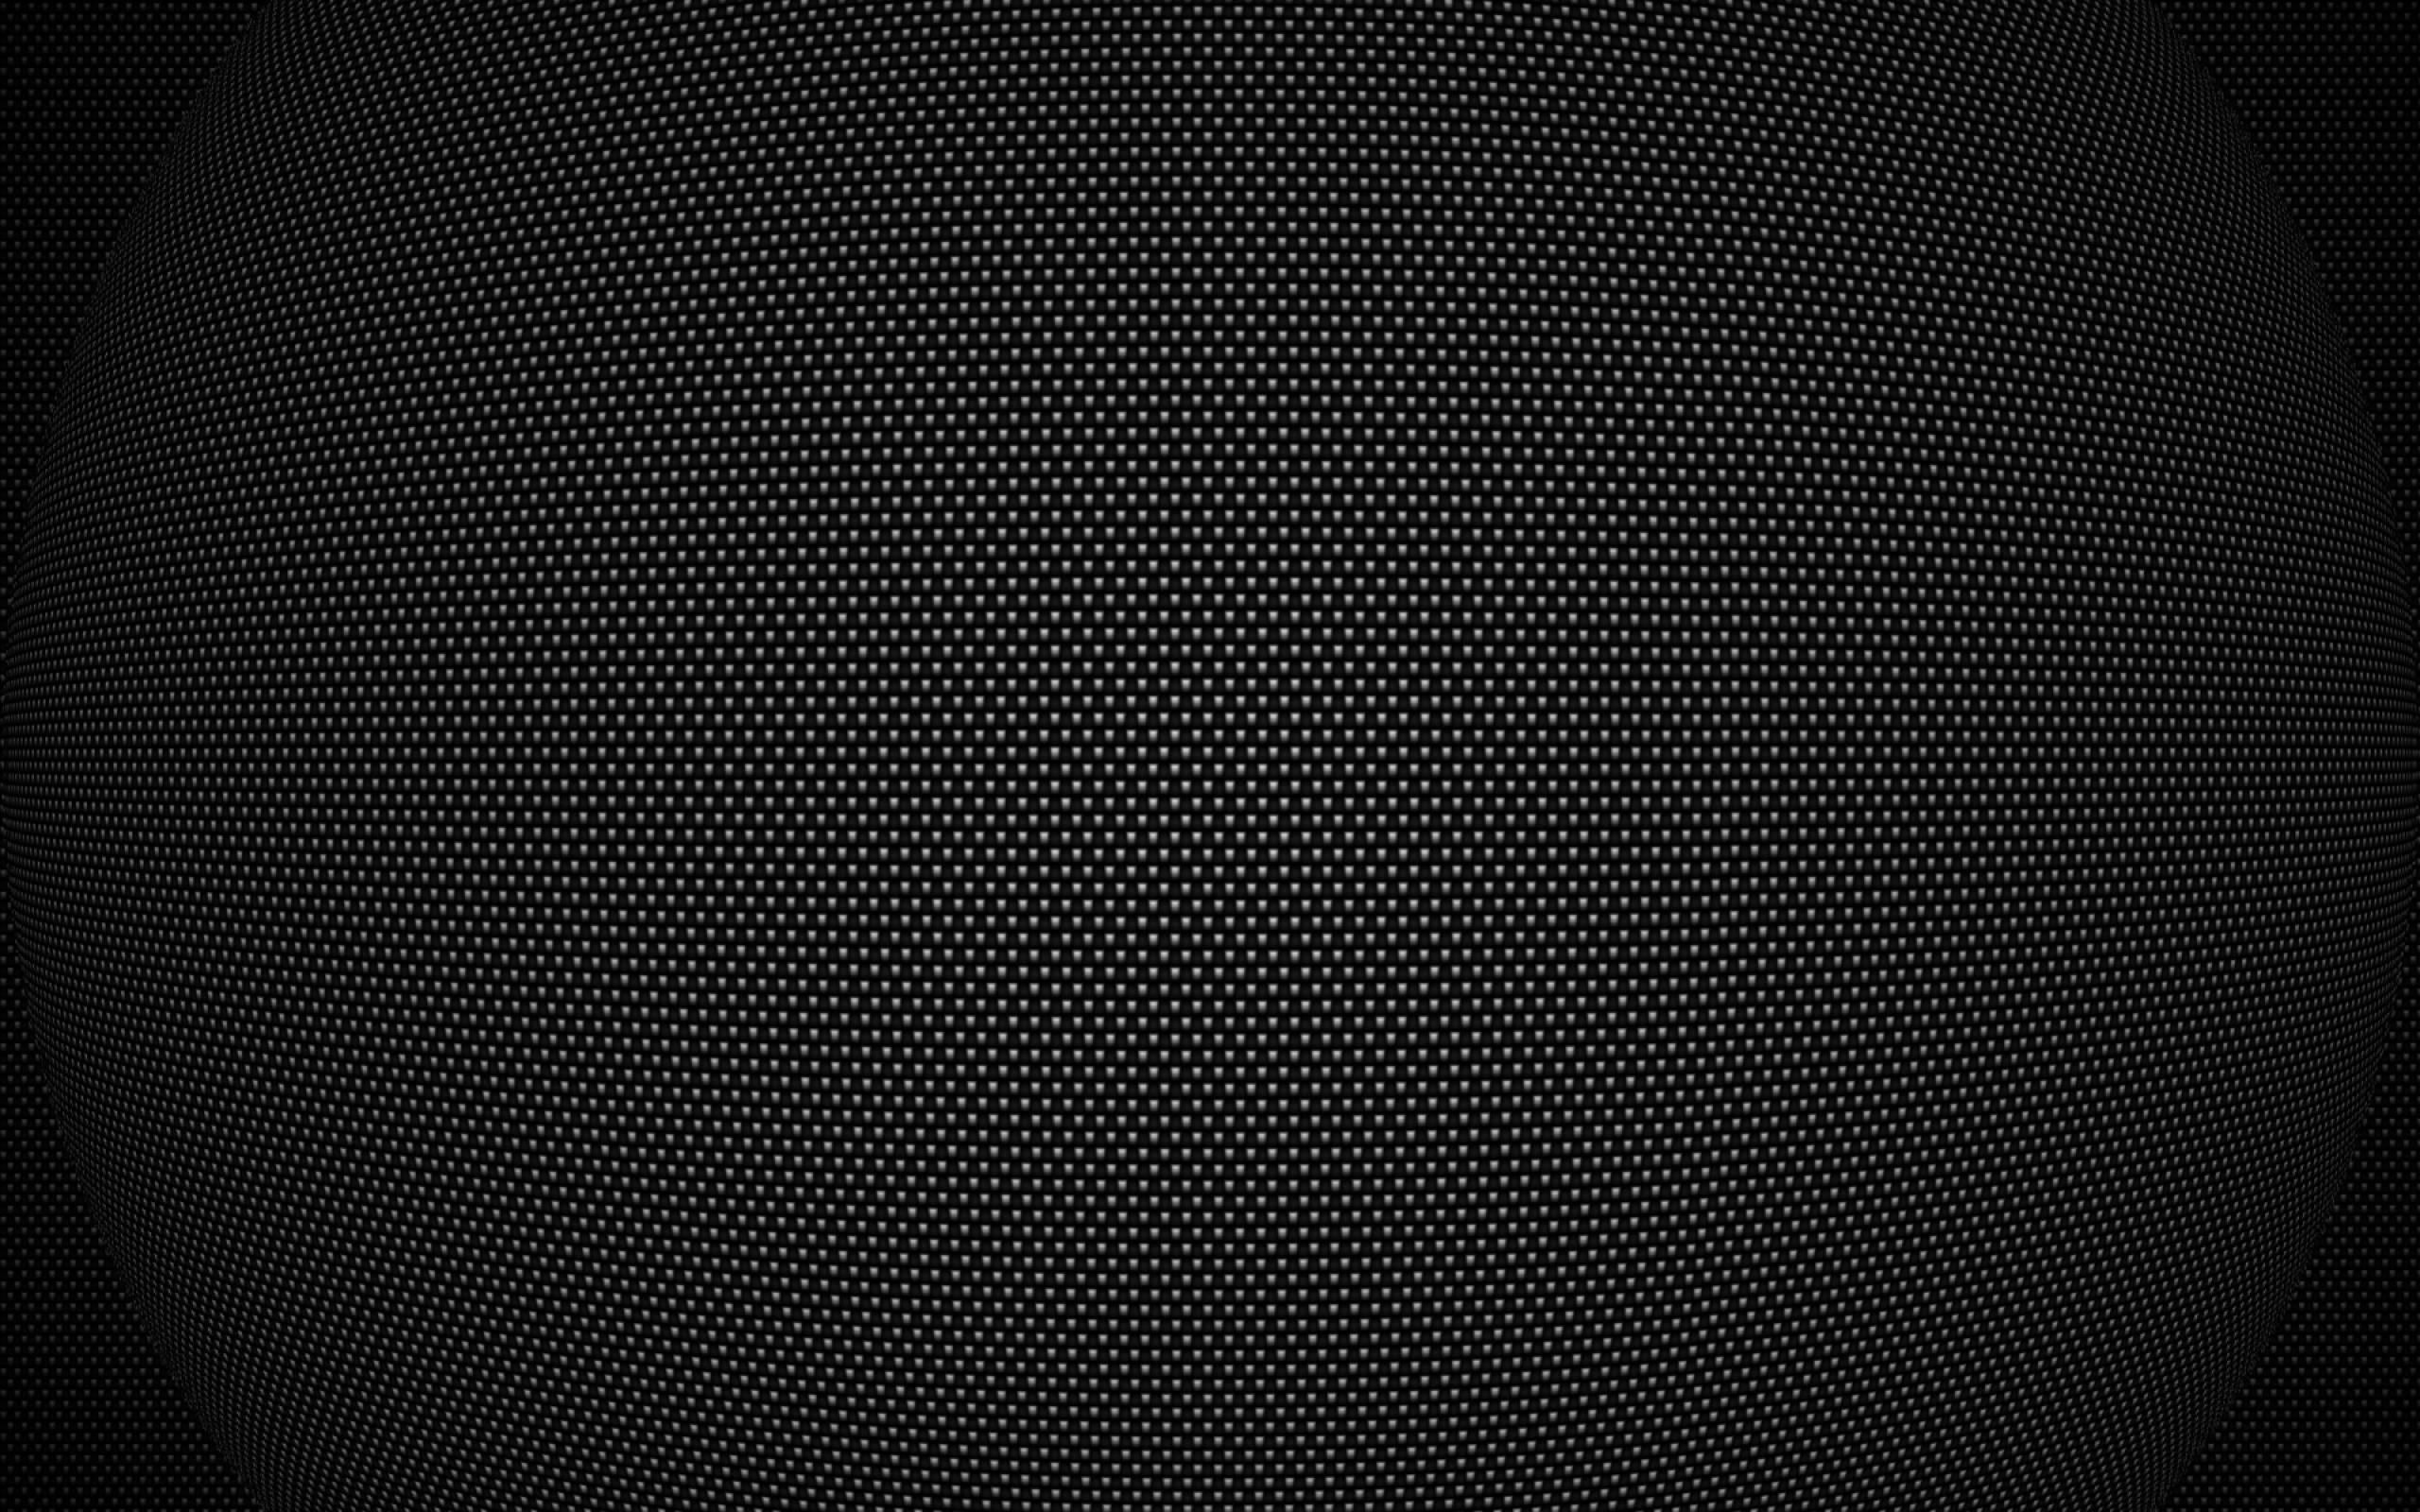 Abstract Dots HD Wallpaper | Background Image